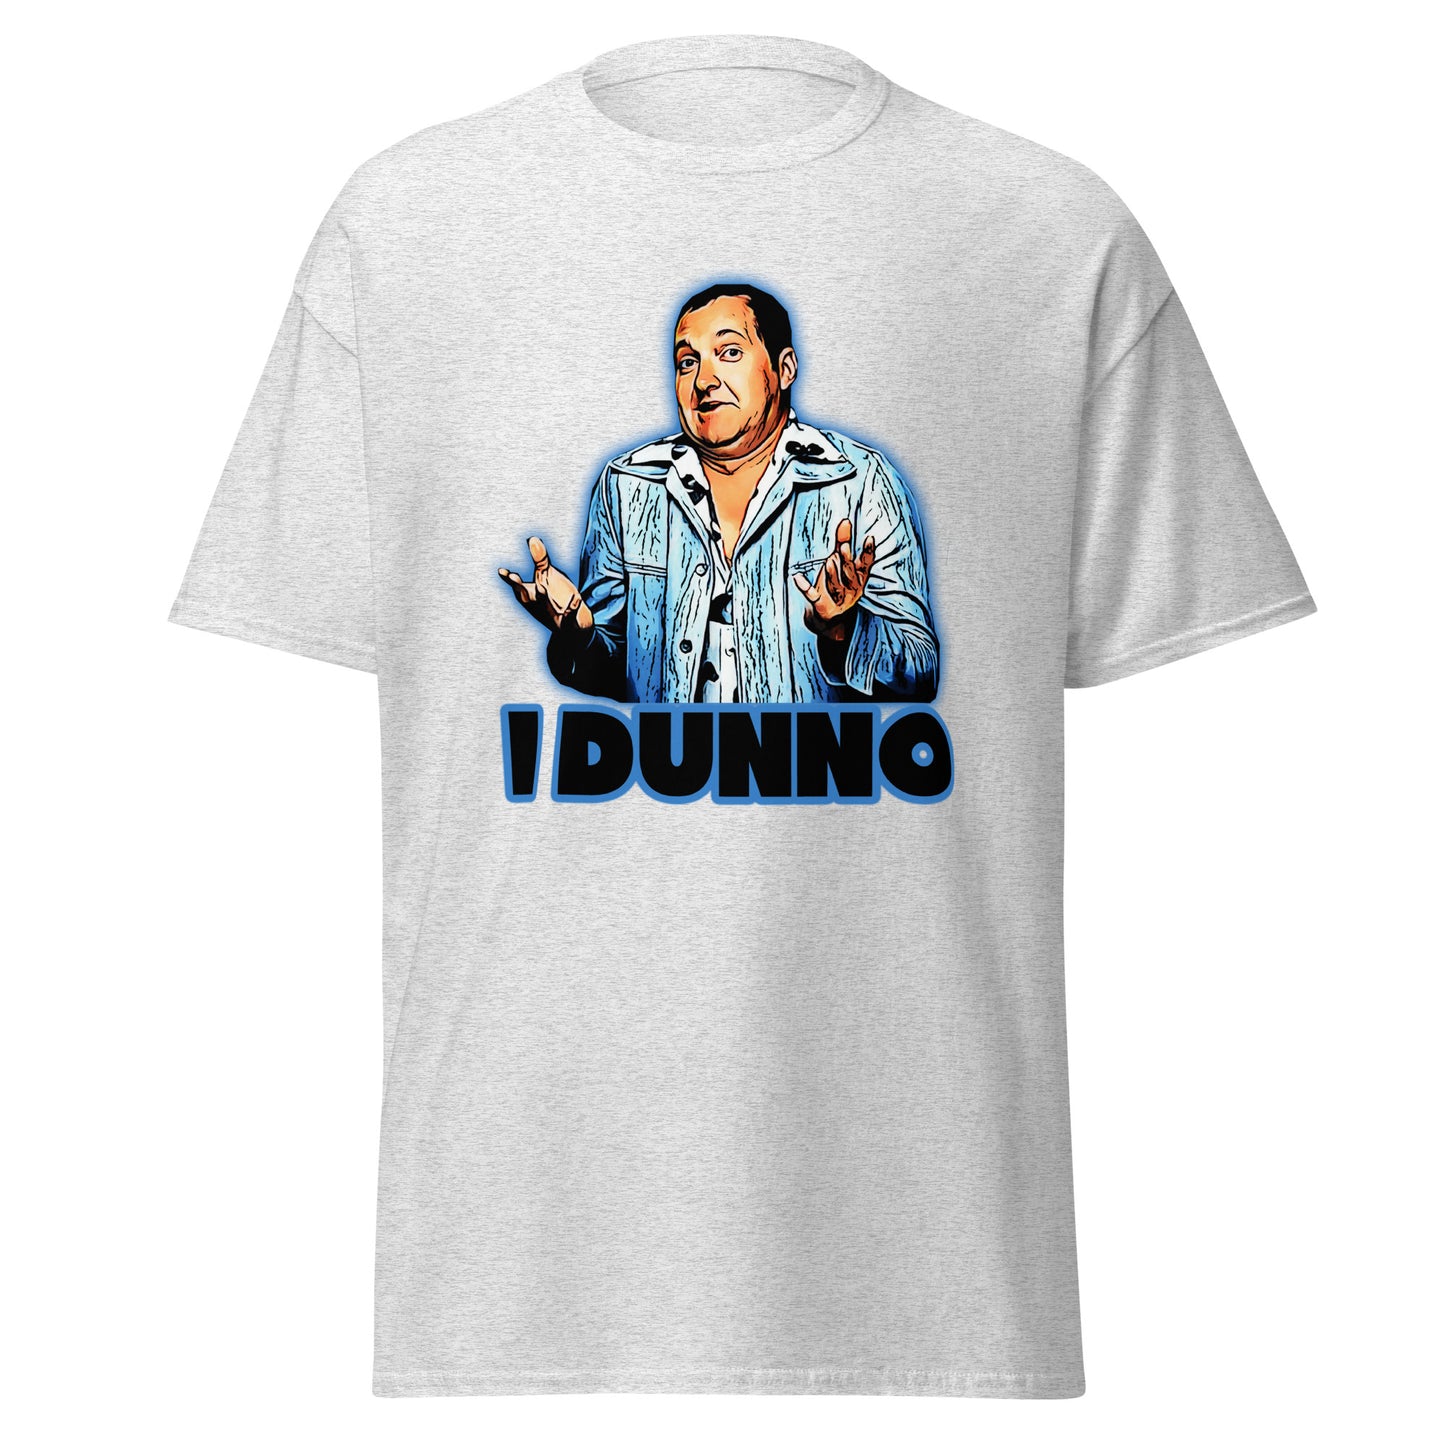 Cousin Eddie - 'I Dunno' T-Shirt - A Classic Quote